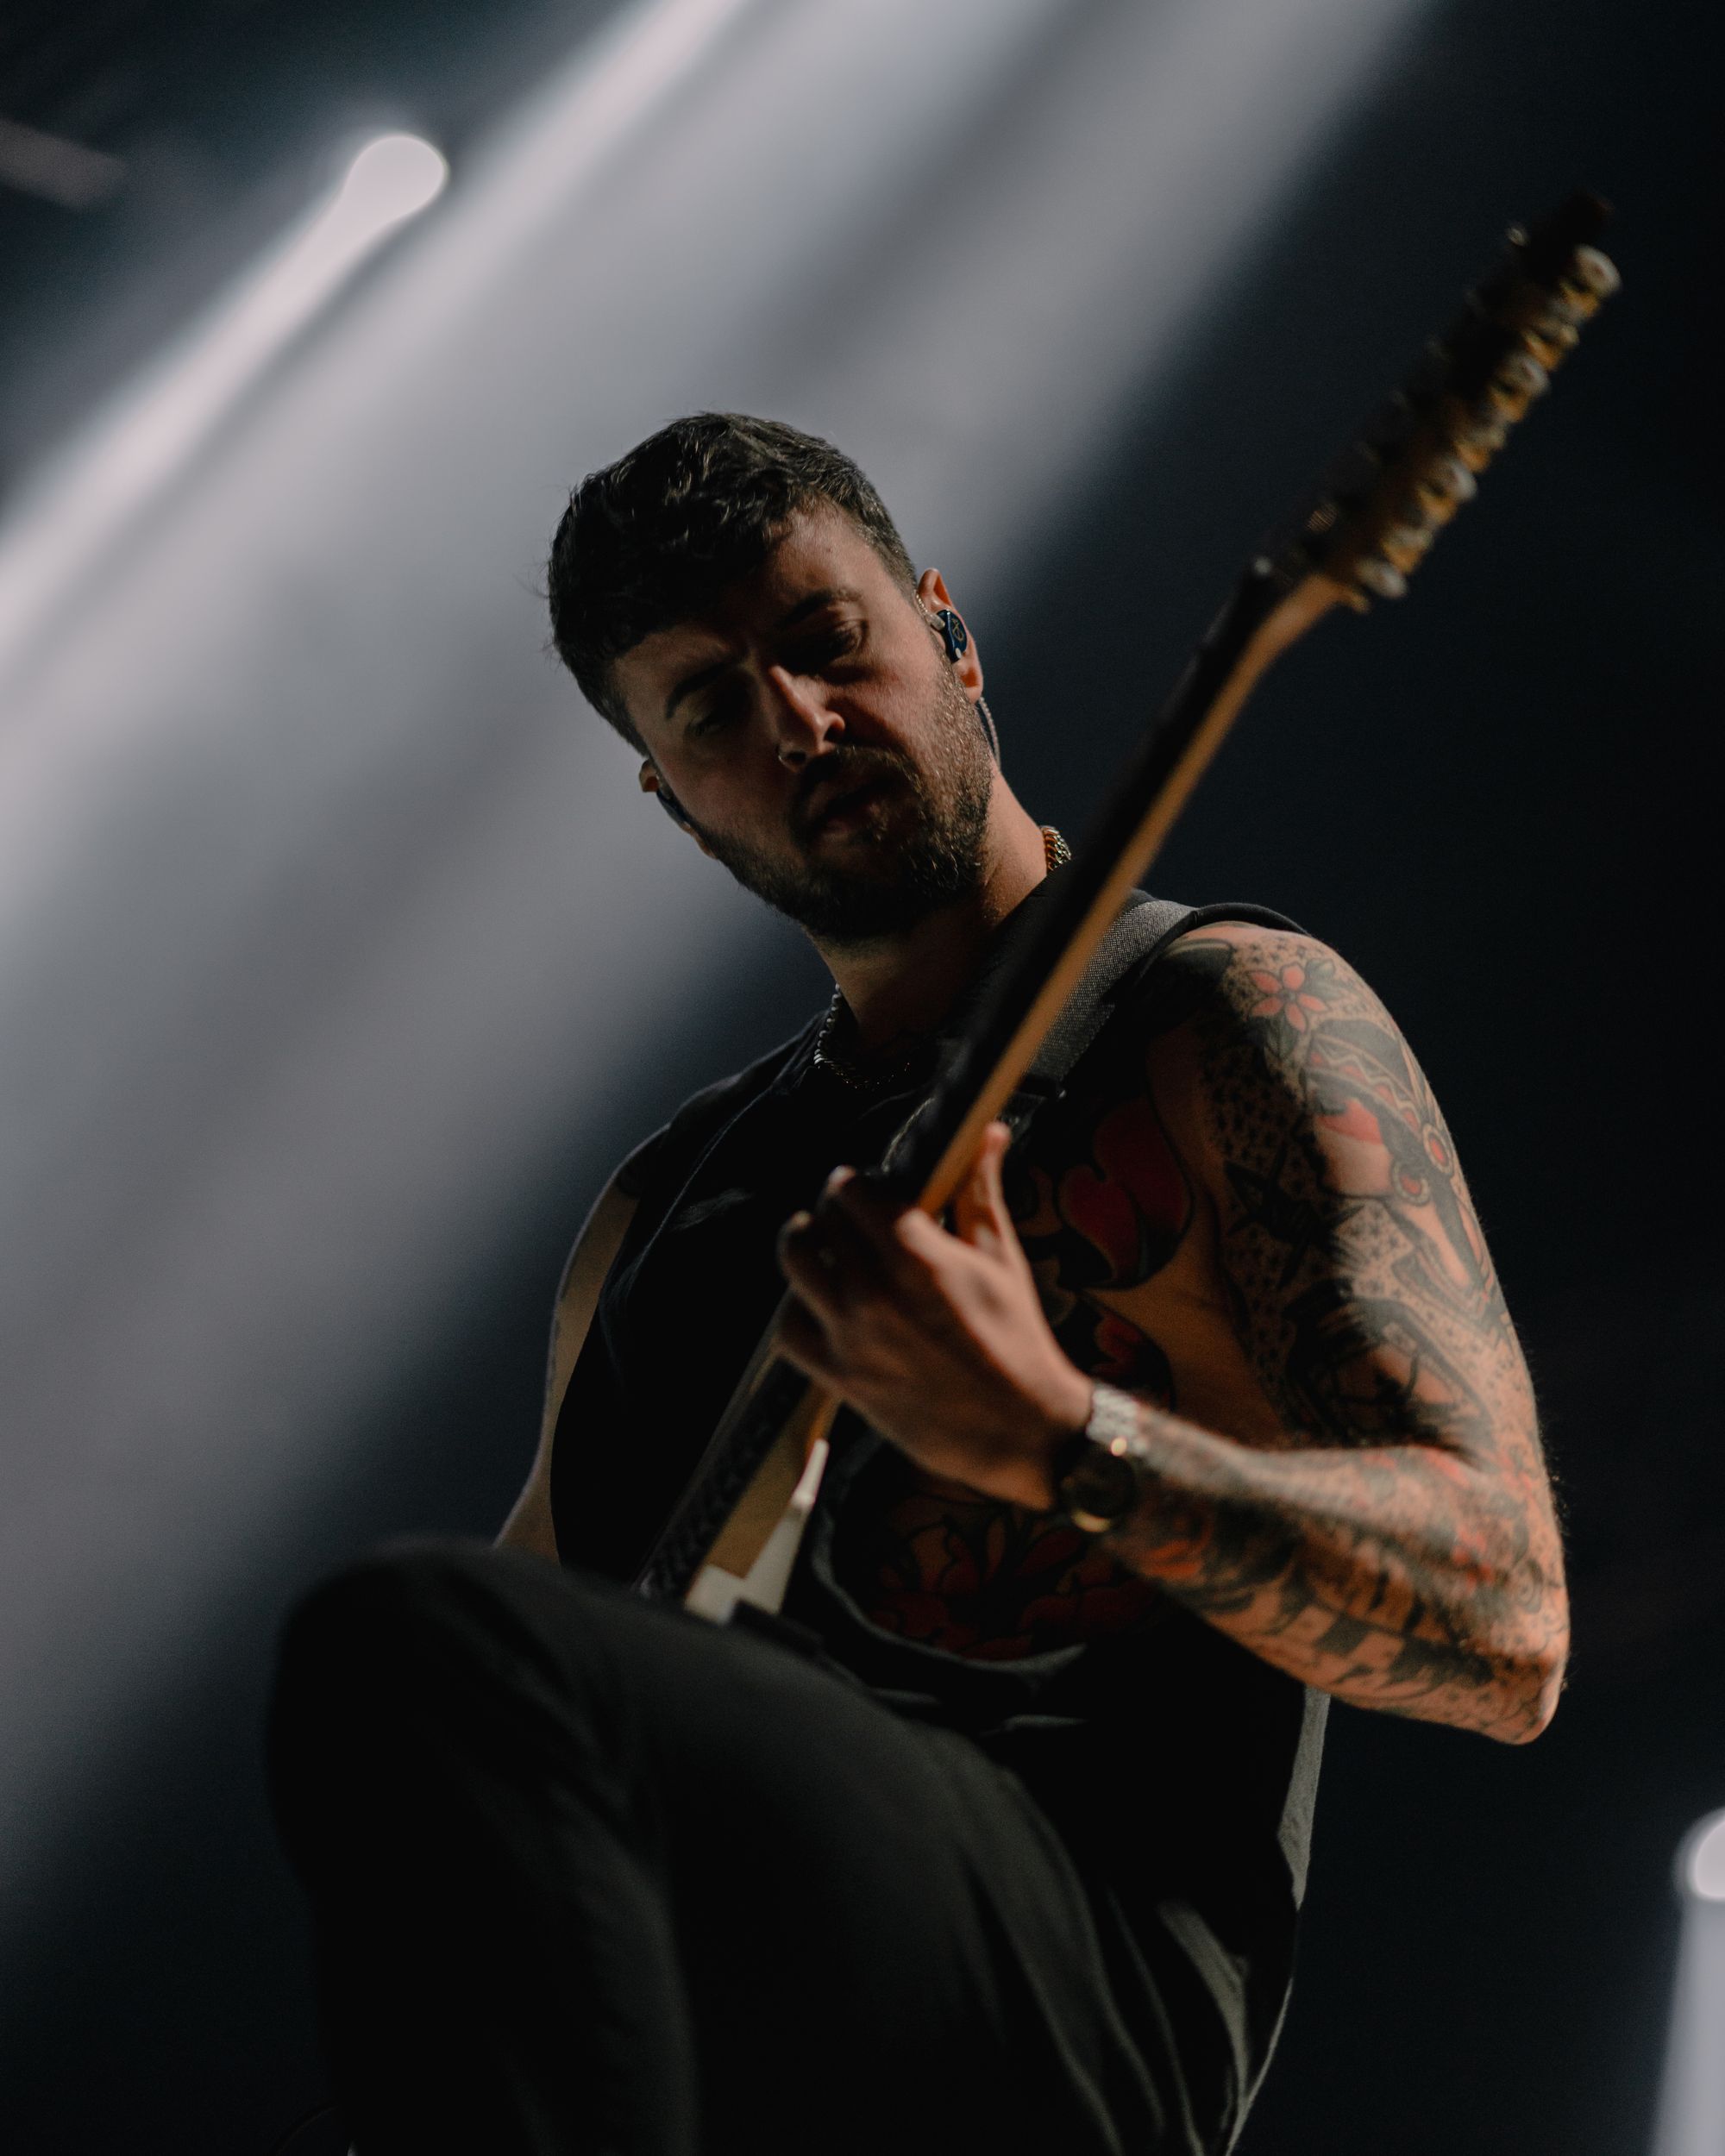 A Decade of Resilience: August Burns Red's "Rescue and Restore" Tour Hits Dallas TX